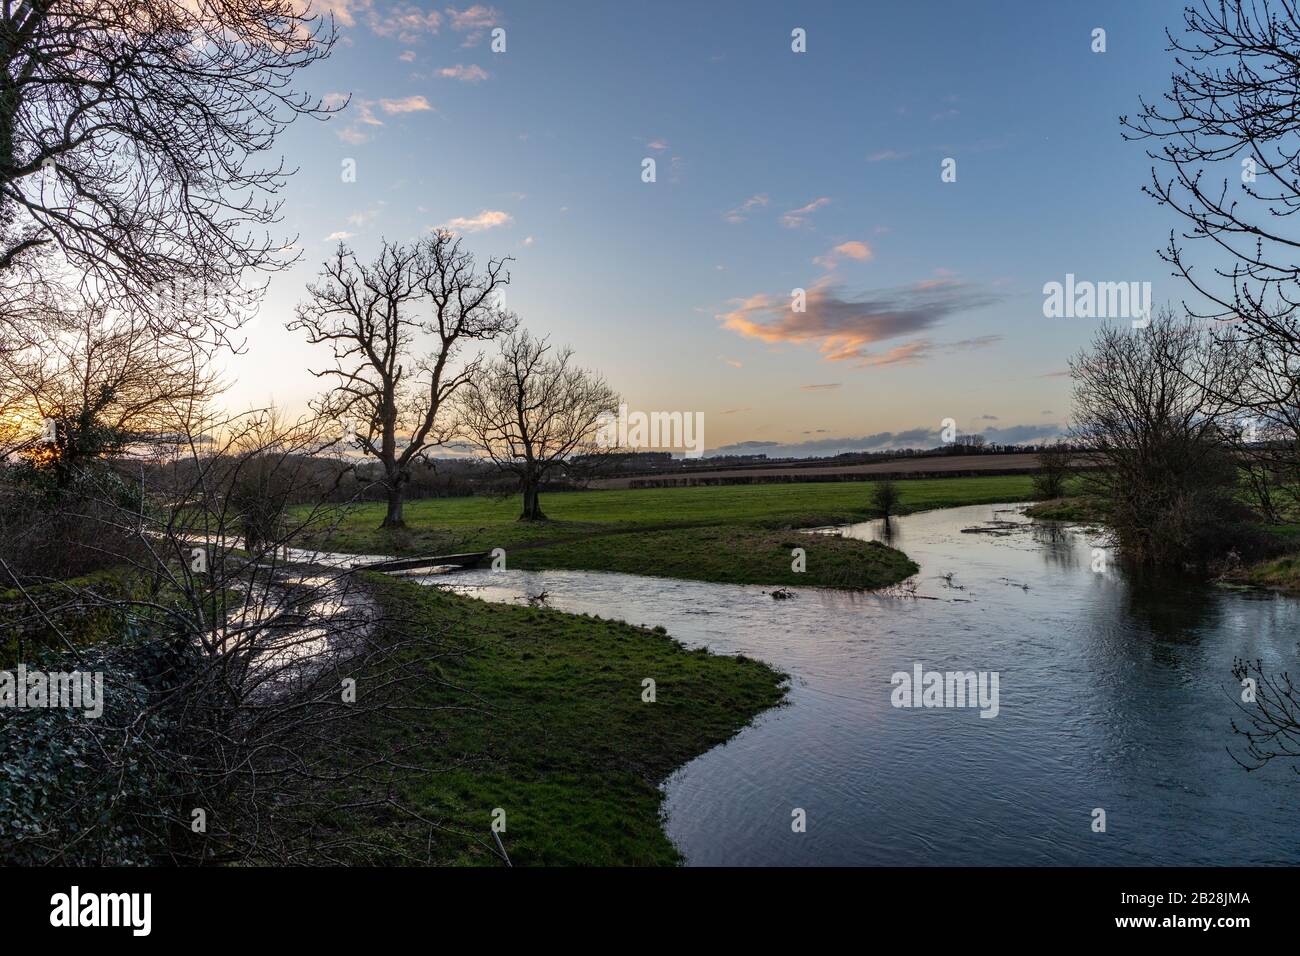 Pictures Taken Near The Source Of The Thames Walk Near To The Village of Kemble In The Cotswolds in England  After The Recent Flooding in Parts of uk. Stock Photo